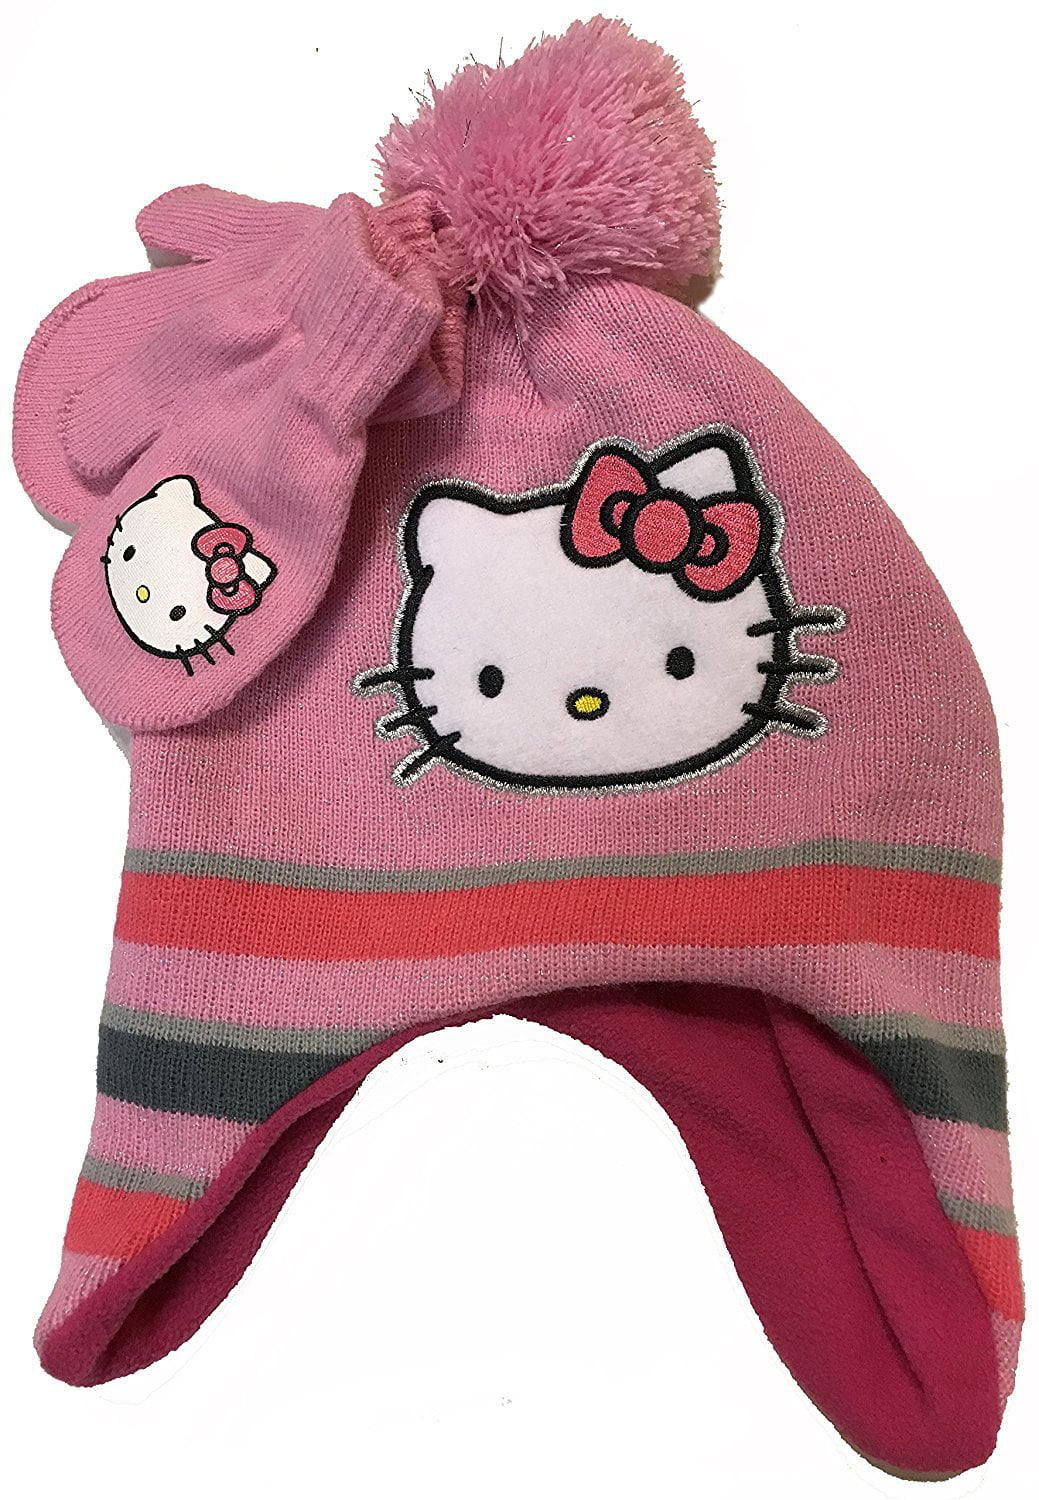 NEW Toddler Girls White Pink Hello Kitty Peruvian Hat and Mittens Set 2T-5T 